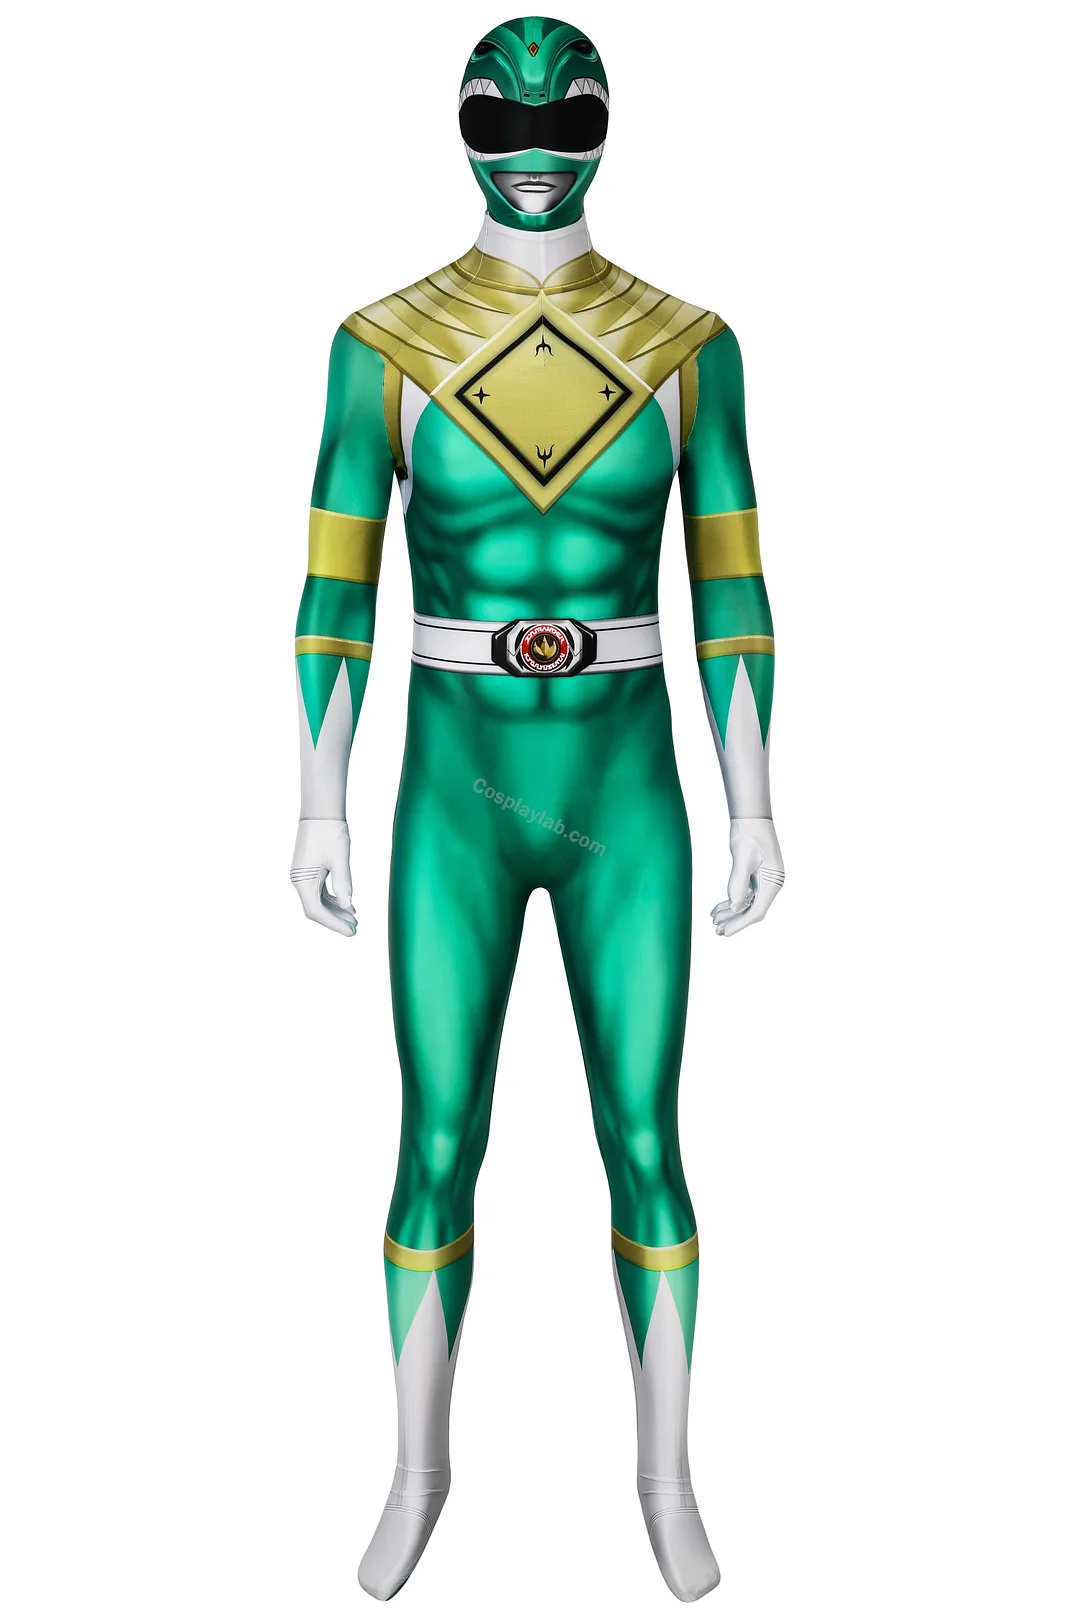 Green Ranger Cosplay Suit Power Rangers Green HQ Printed Spandex Costume Jumpsuit By CosplayLab